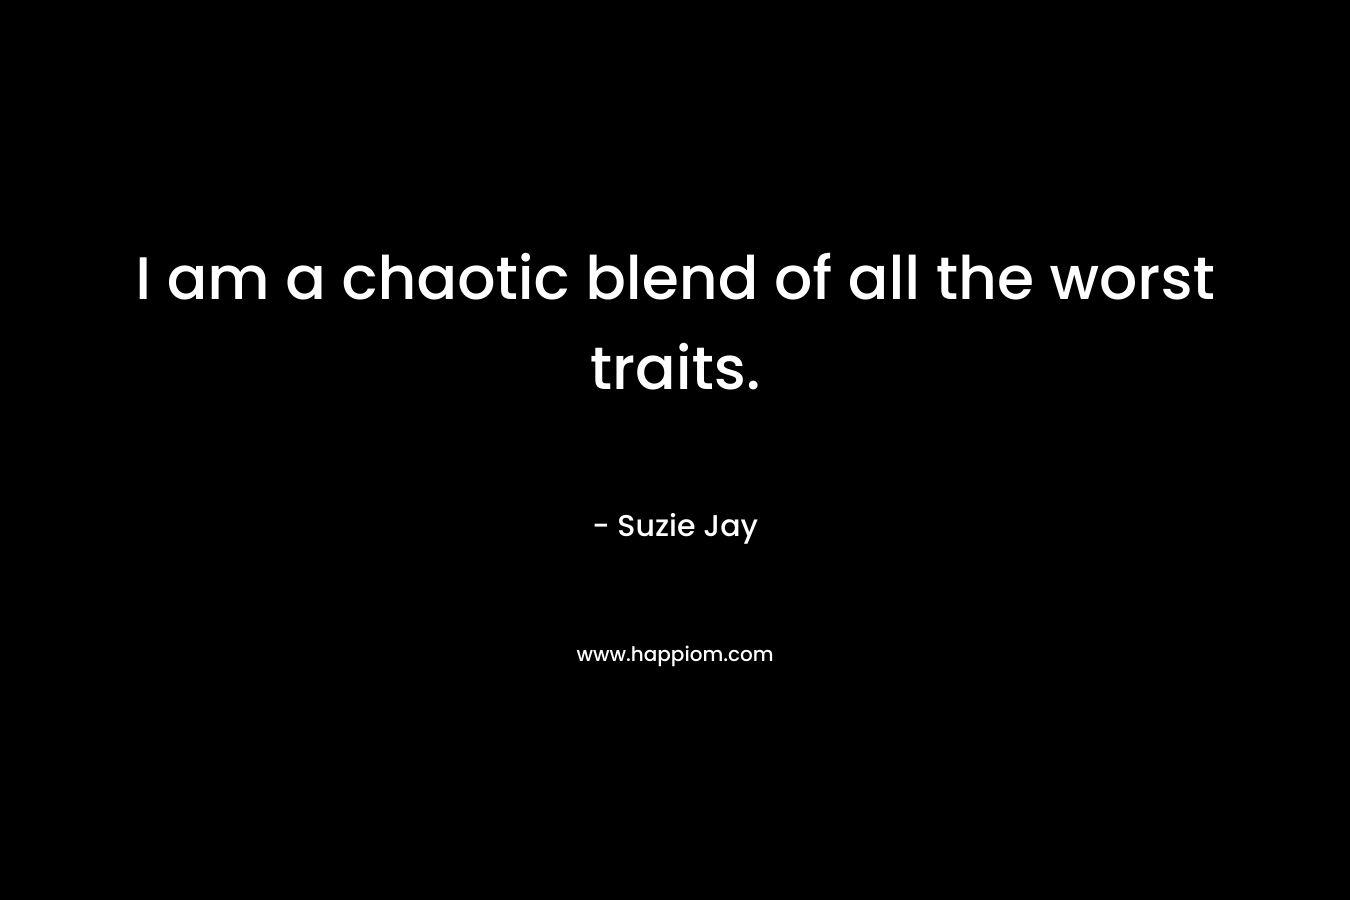 I am a chaotic blend of all the worst traits. – Suzie Jay